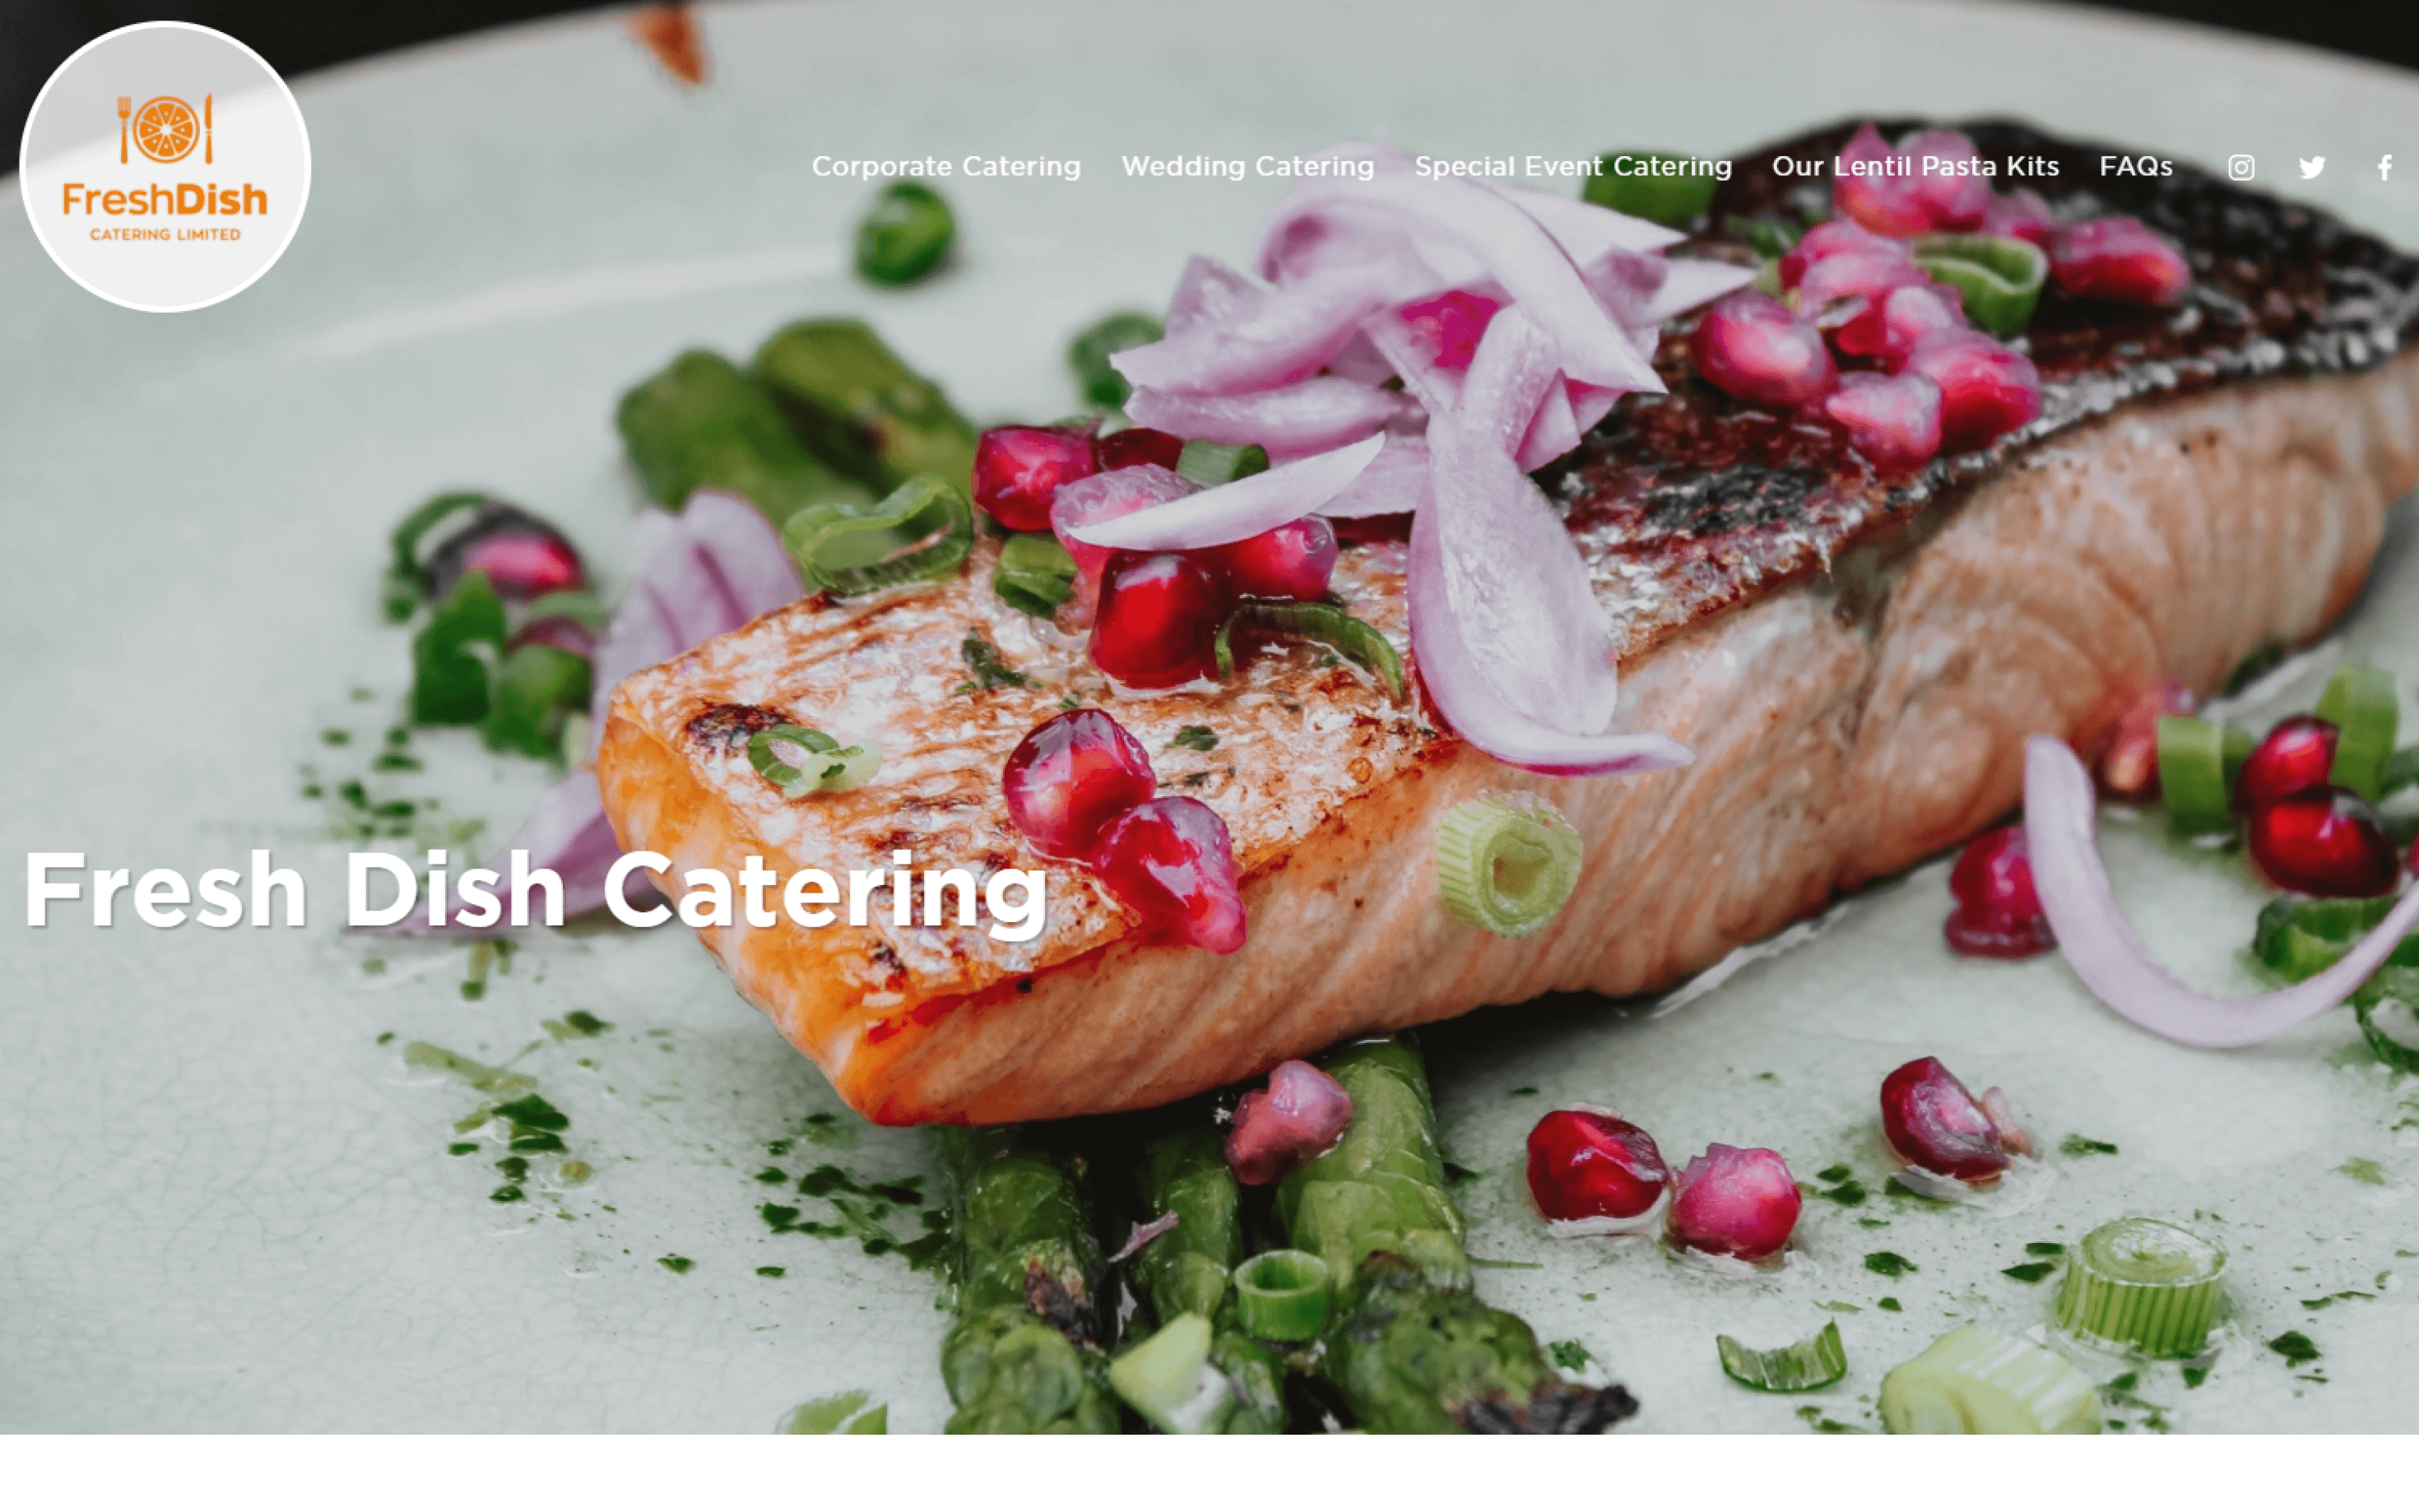 Squarespace website with a custom design - Fresh Dish Catering homepage